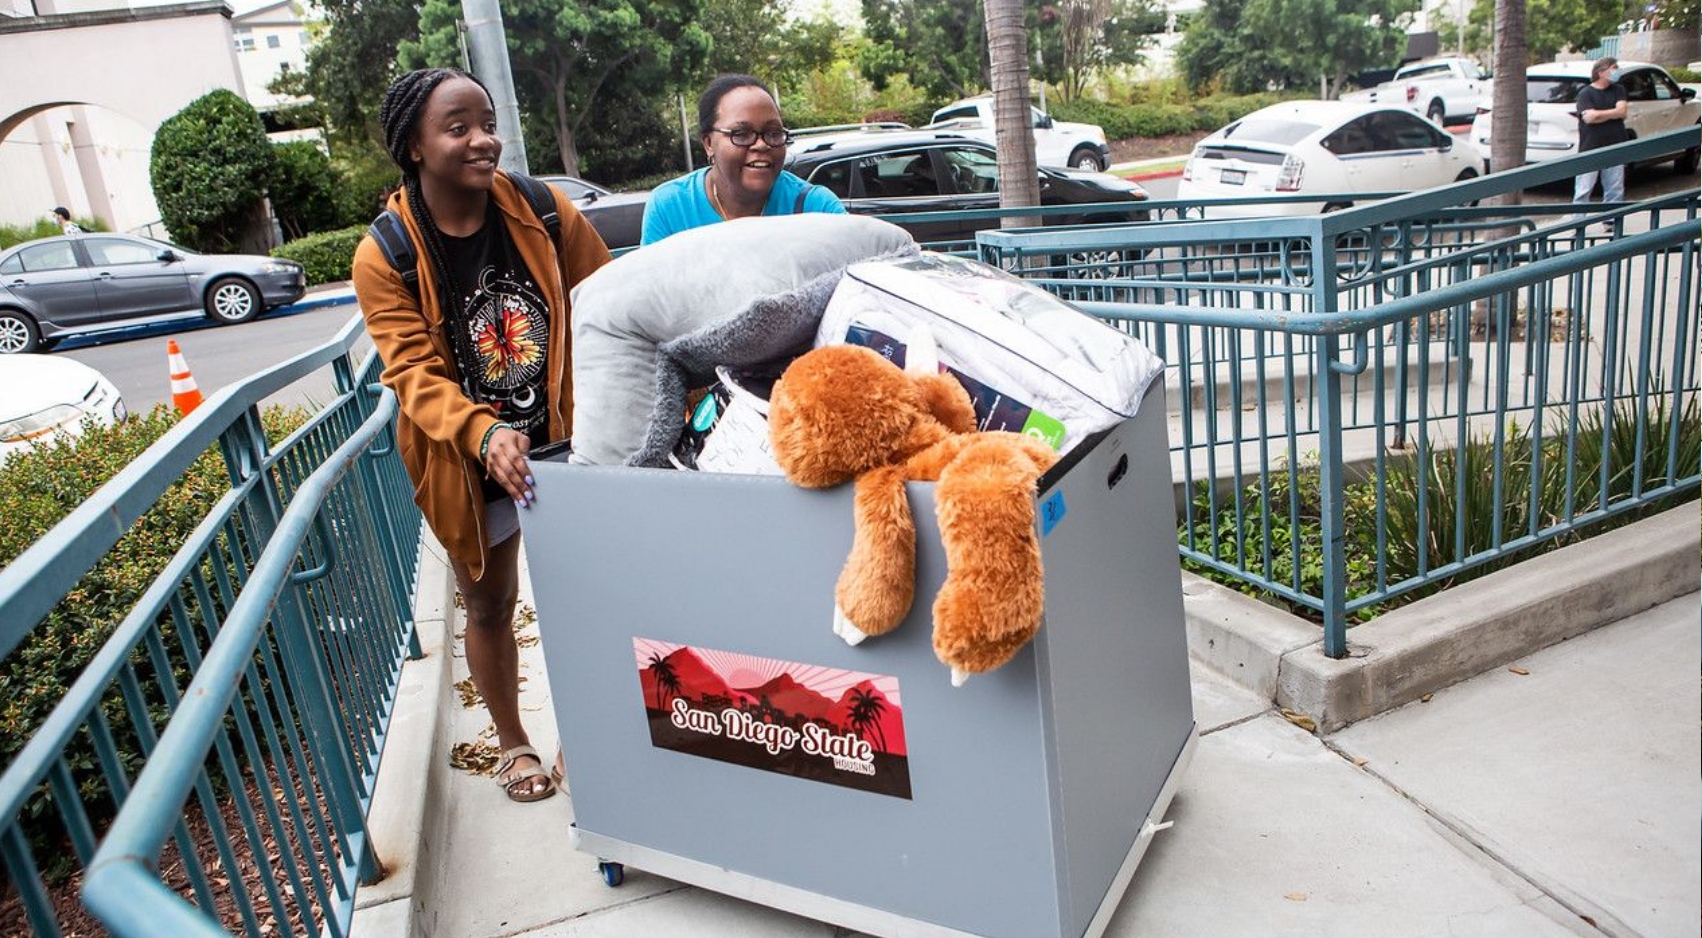 Photograph of a family rolling a cart filled with a student's belongings on SDSU Move-In Day.